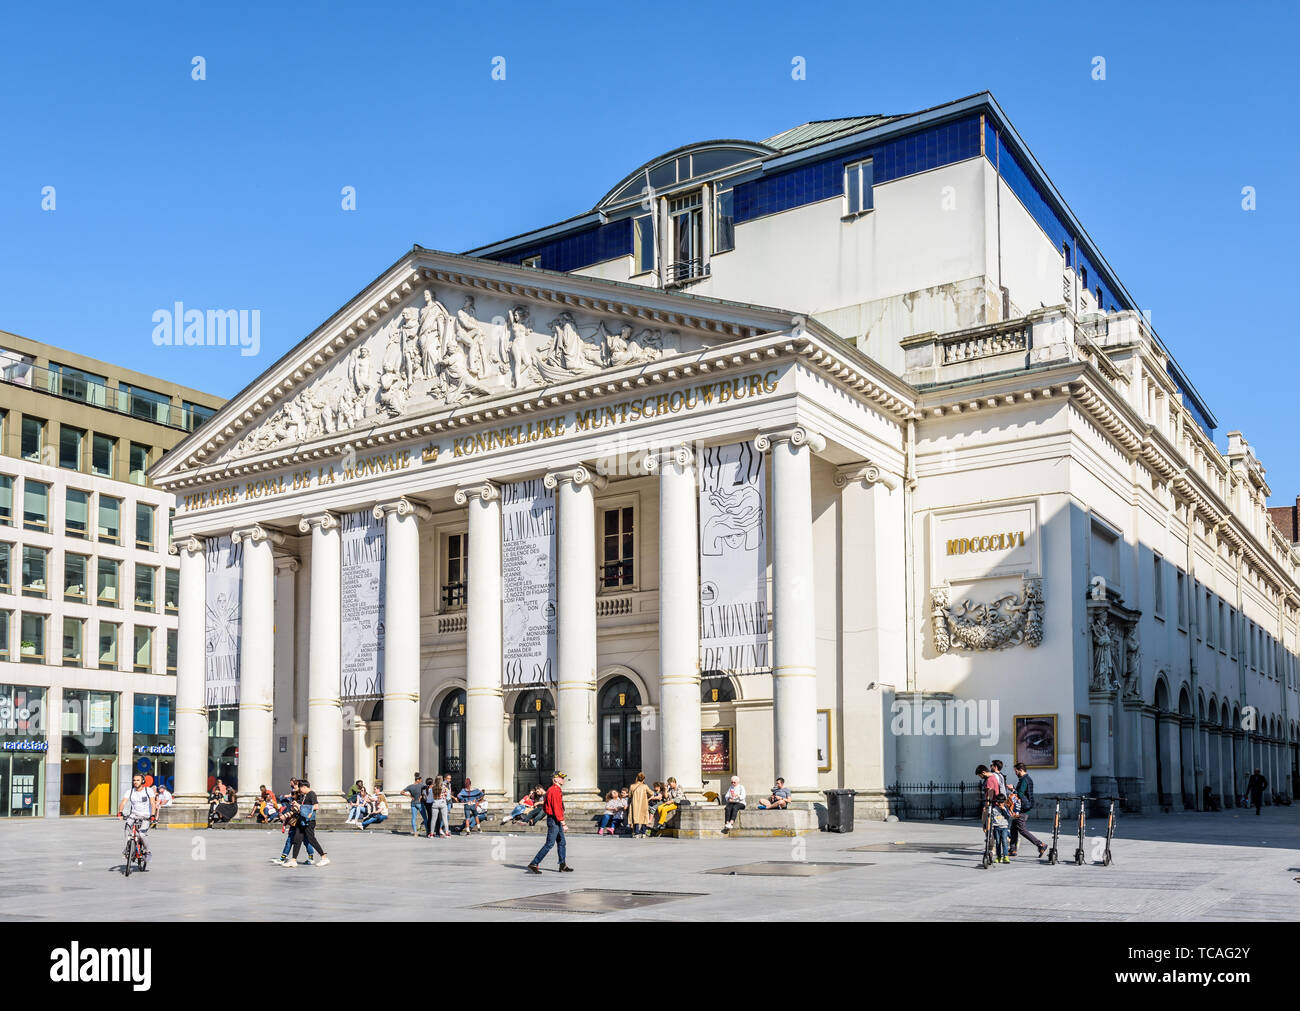 Three-quarter front view of the Royal Theater of the Mint, the opera house in the historic center of Brussels, Belgium. Stock Photo